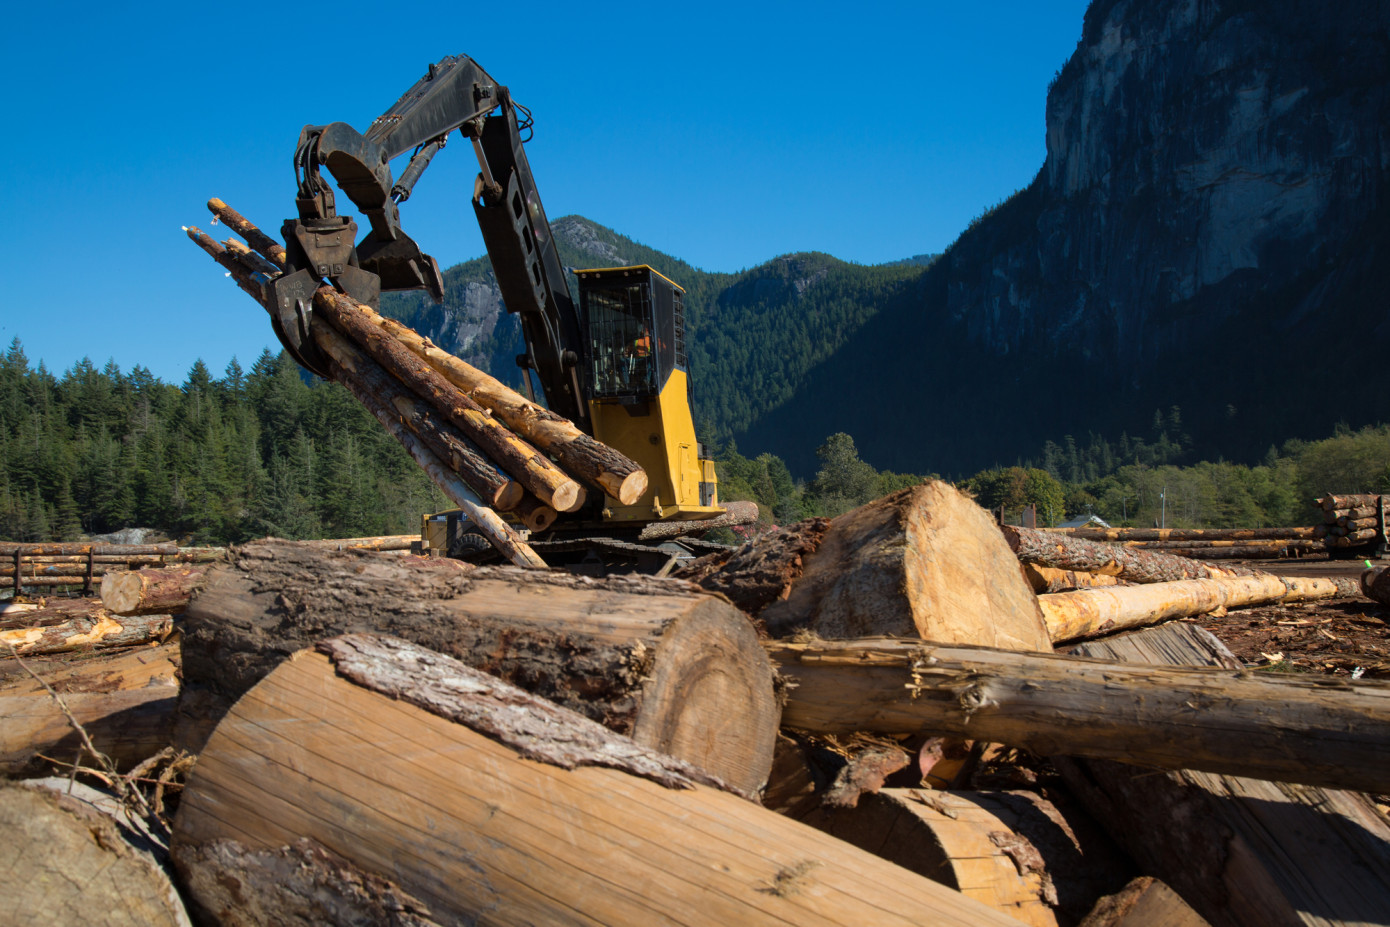 Canadian wood product manufacturing operates at 77.1% capacity in Q1 2023